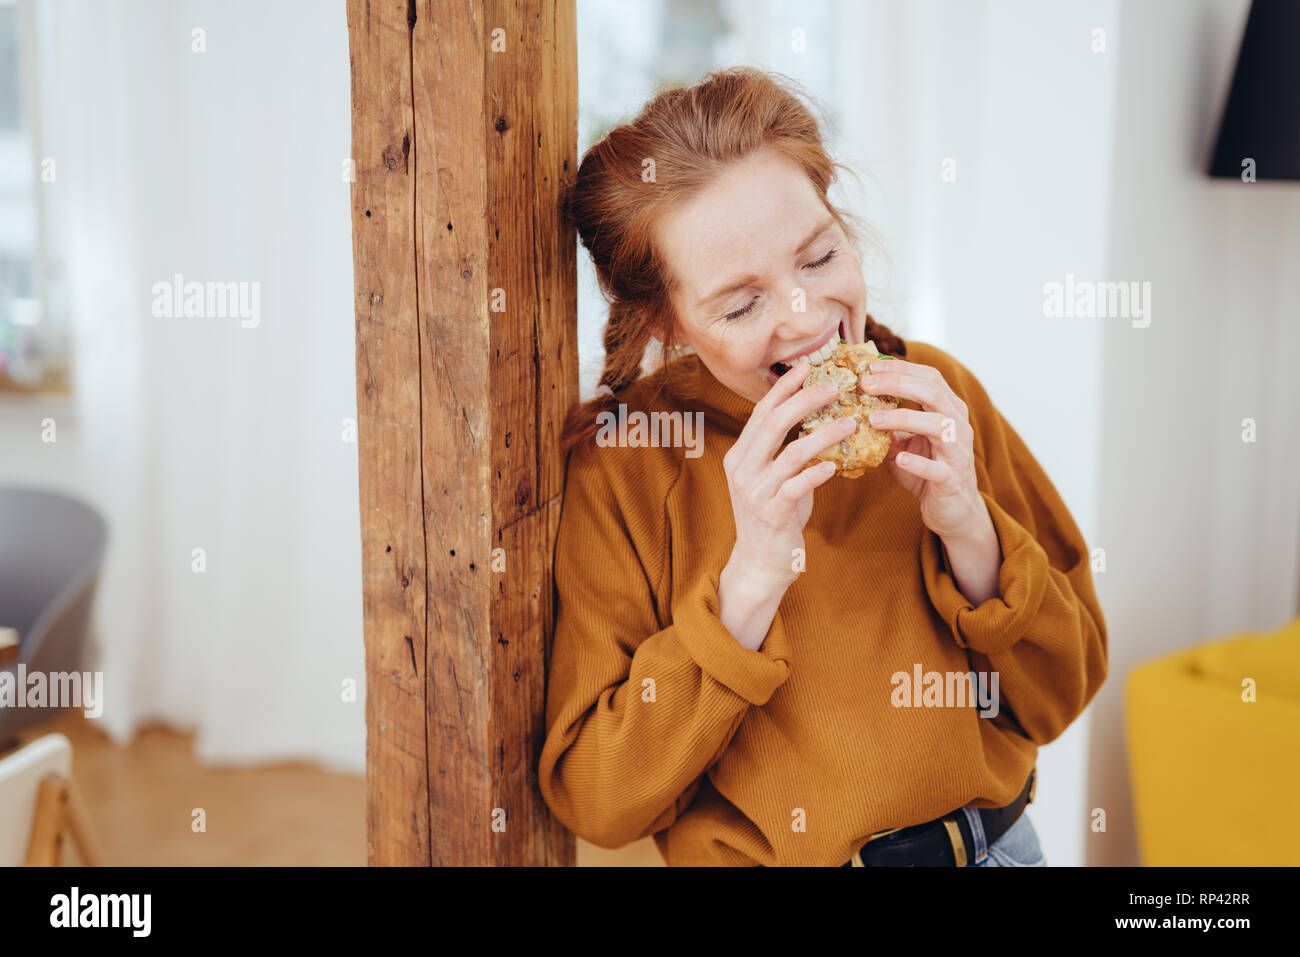 Hungry young woman taking a bite of a healthy wholewheat sandwich with a happy smile leaning on a wooden pillar indoors at home Stock Photo